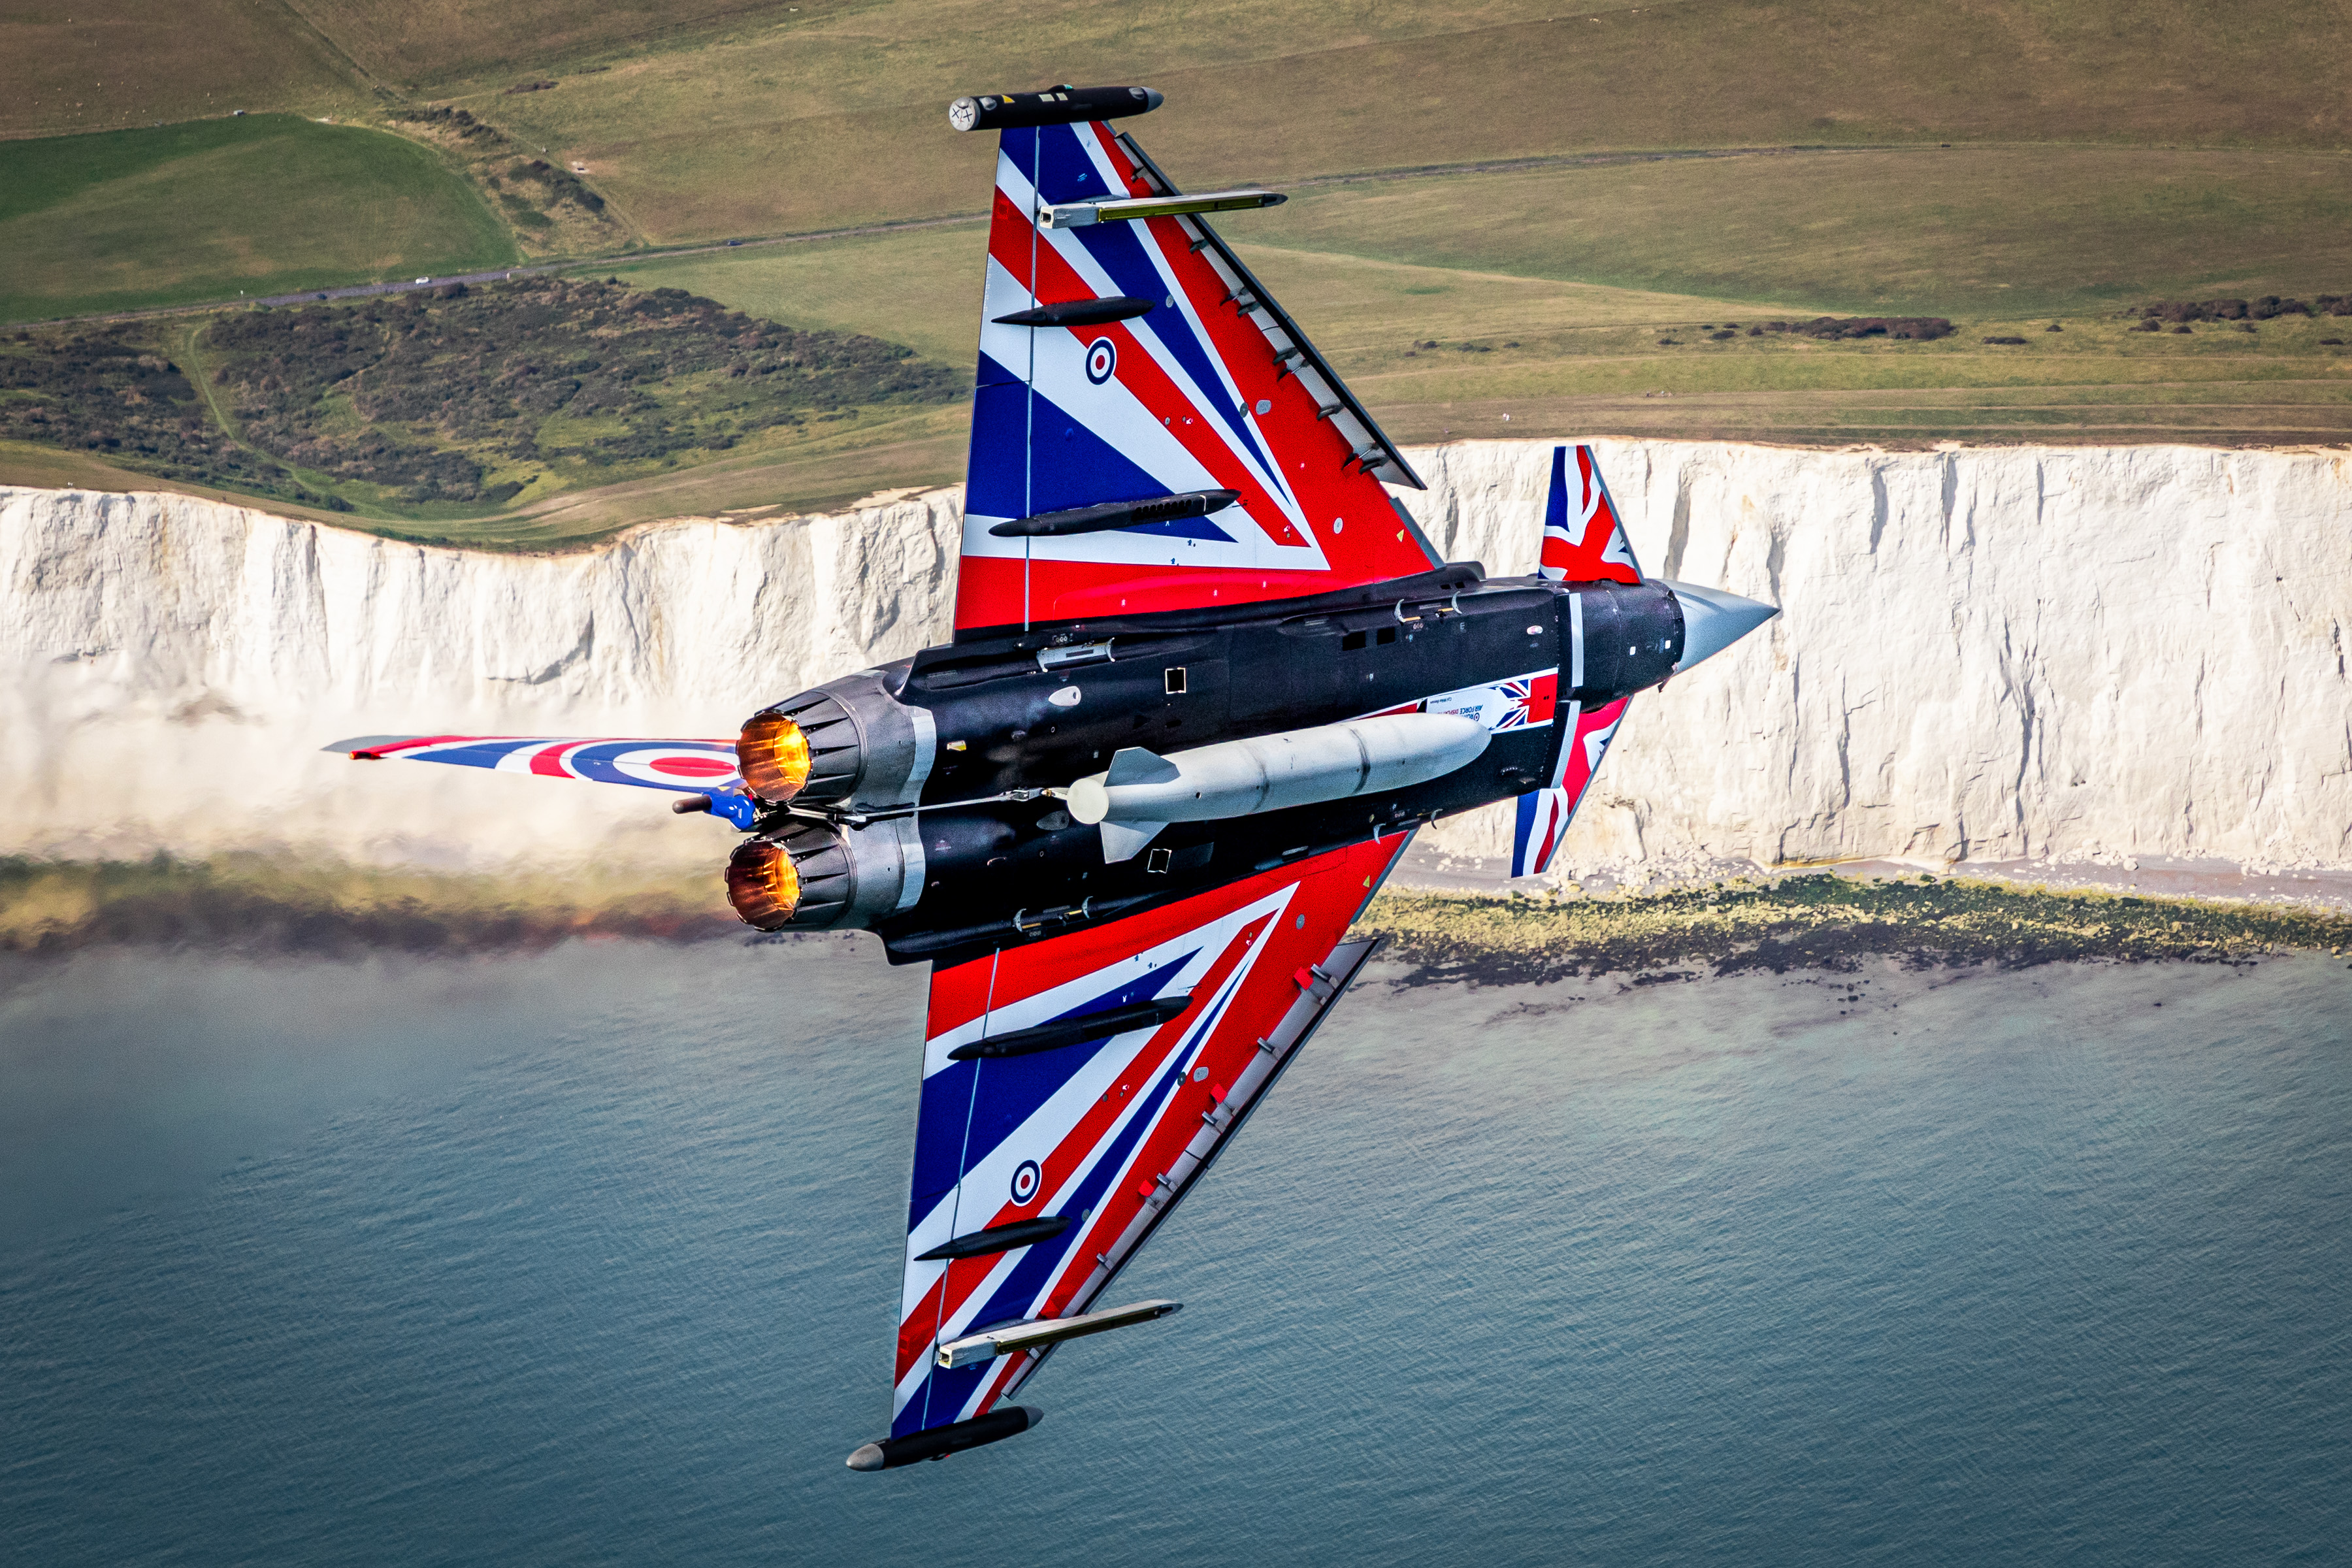 Typhoon with Union Jack painting flies over the sea and white cliffs of Dover.